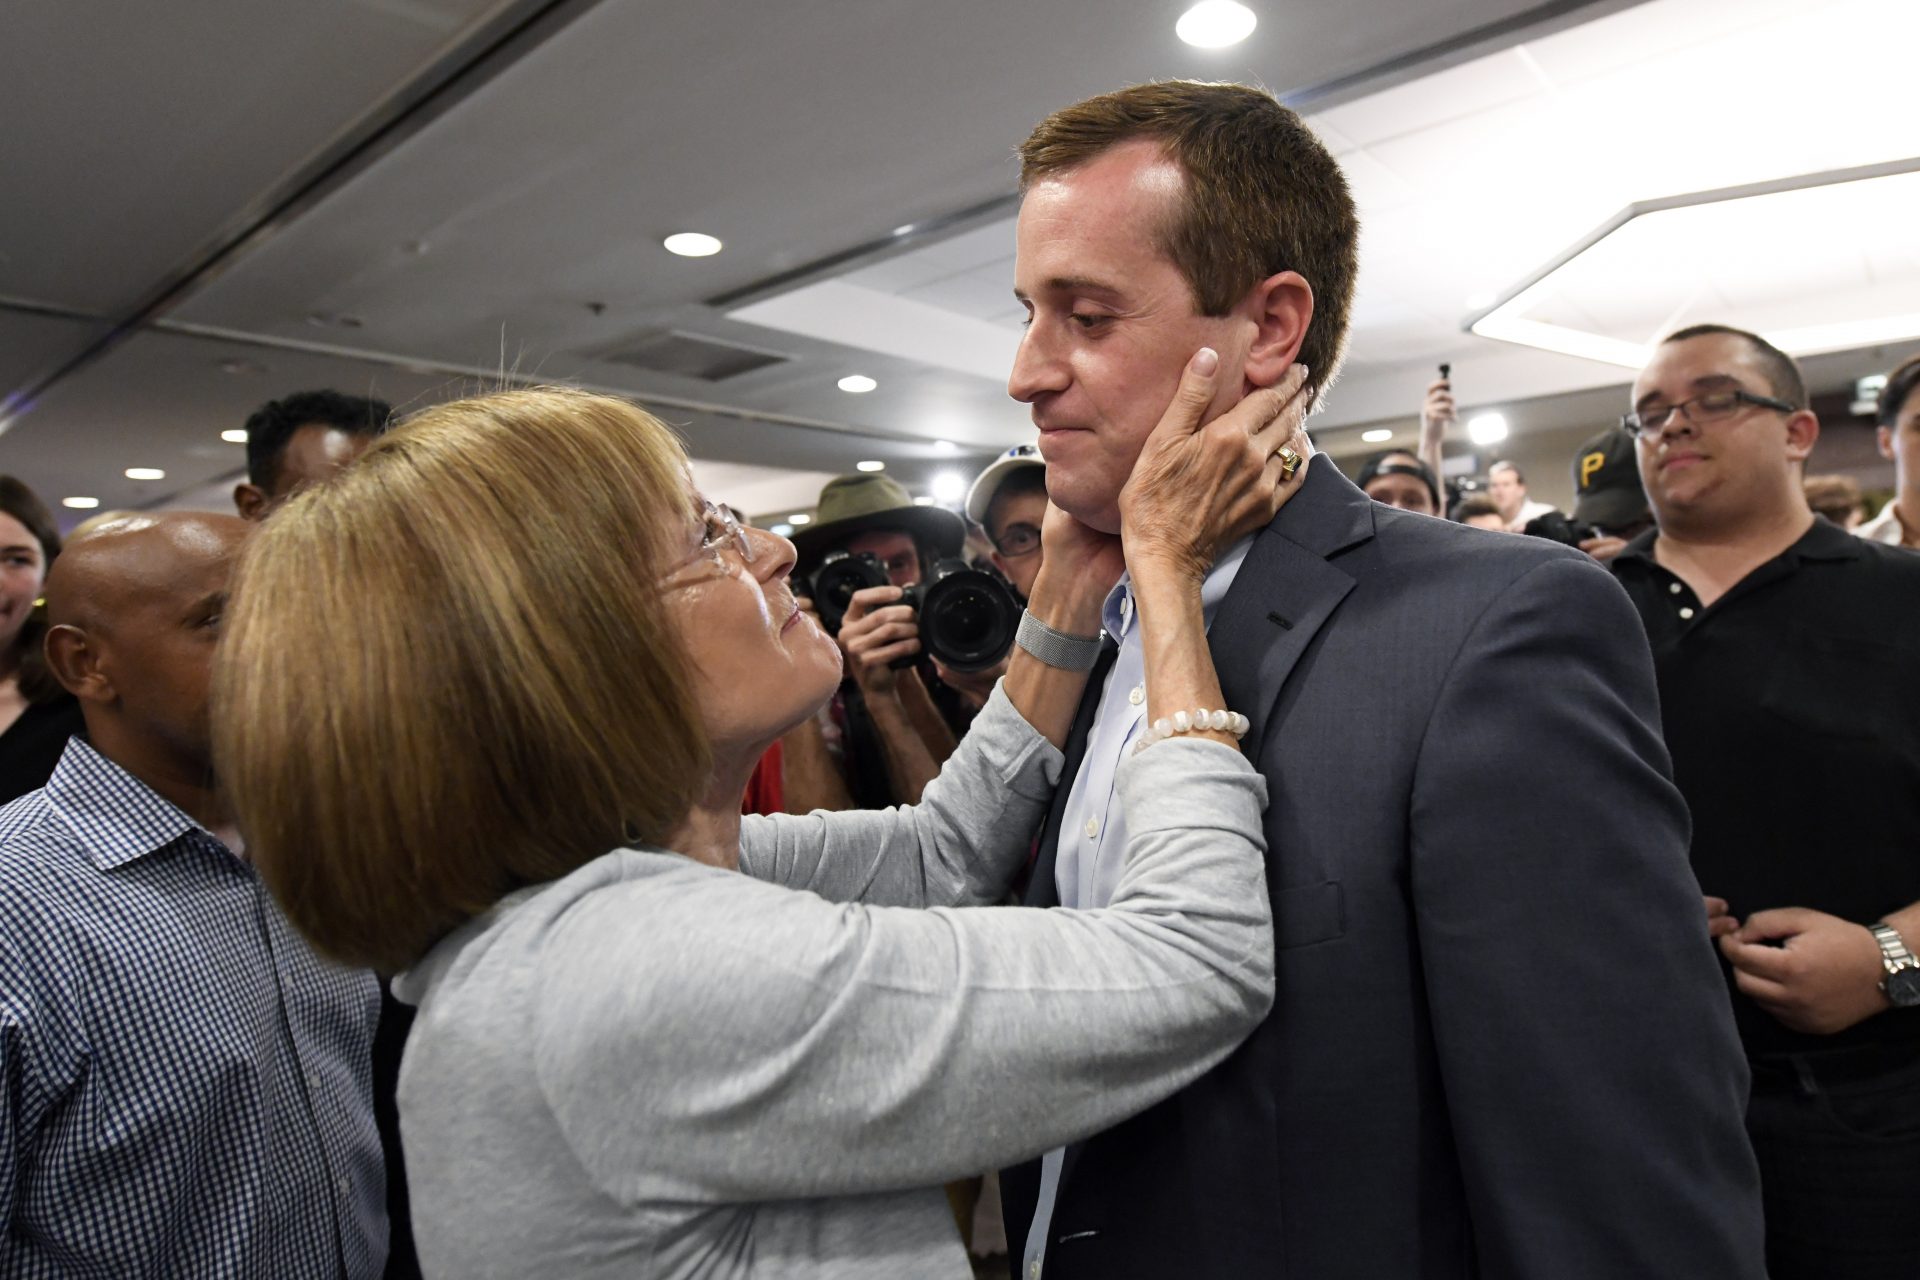 Mattye Silverman of Charlotte, consoles Democrat Dan McCready after he lost a special election for United States Congress in North Carolina's 9th Congressional District to Republican, Dan Bishop, Tuesday, Sept. 10, 2019, in Charlotte, N.C.